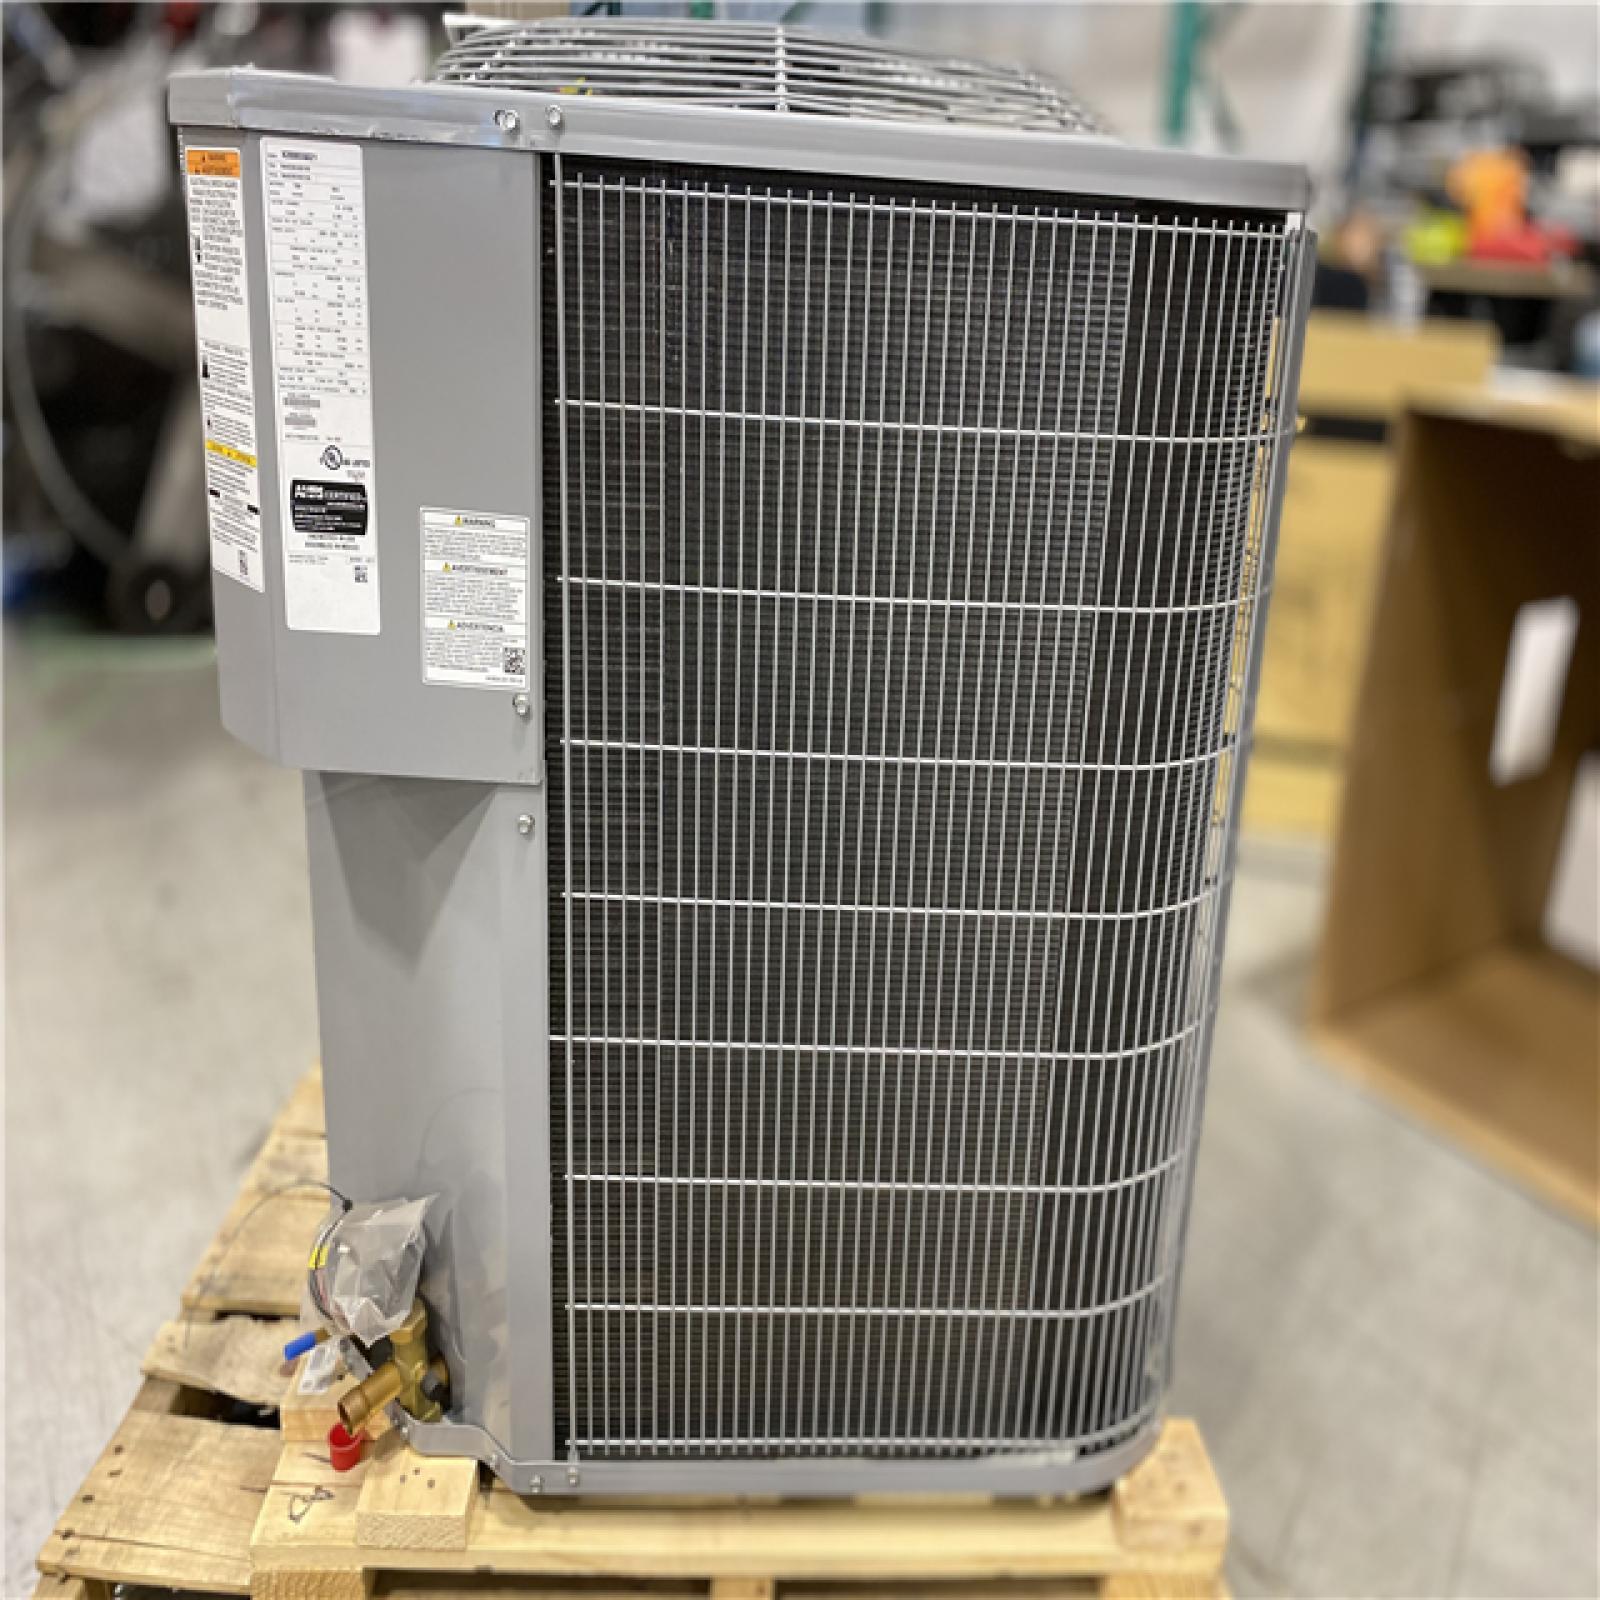 DALLAS LOCATION - Smartcomfort By Carrier 3 Ton 14 Seer Condensing Unit